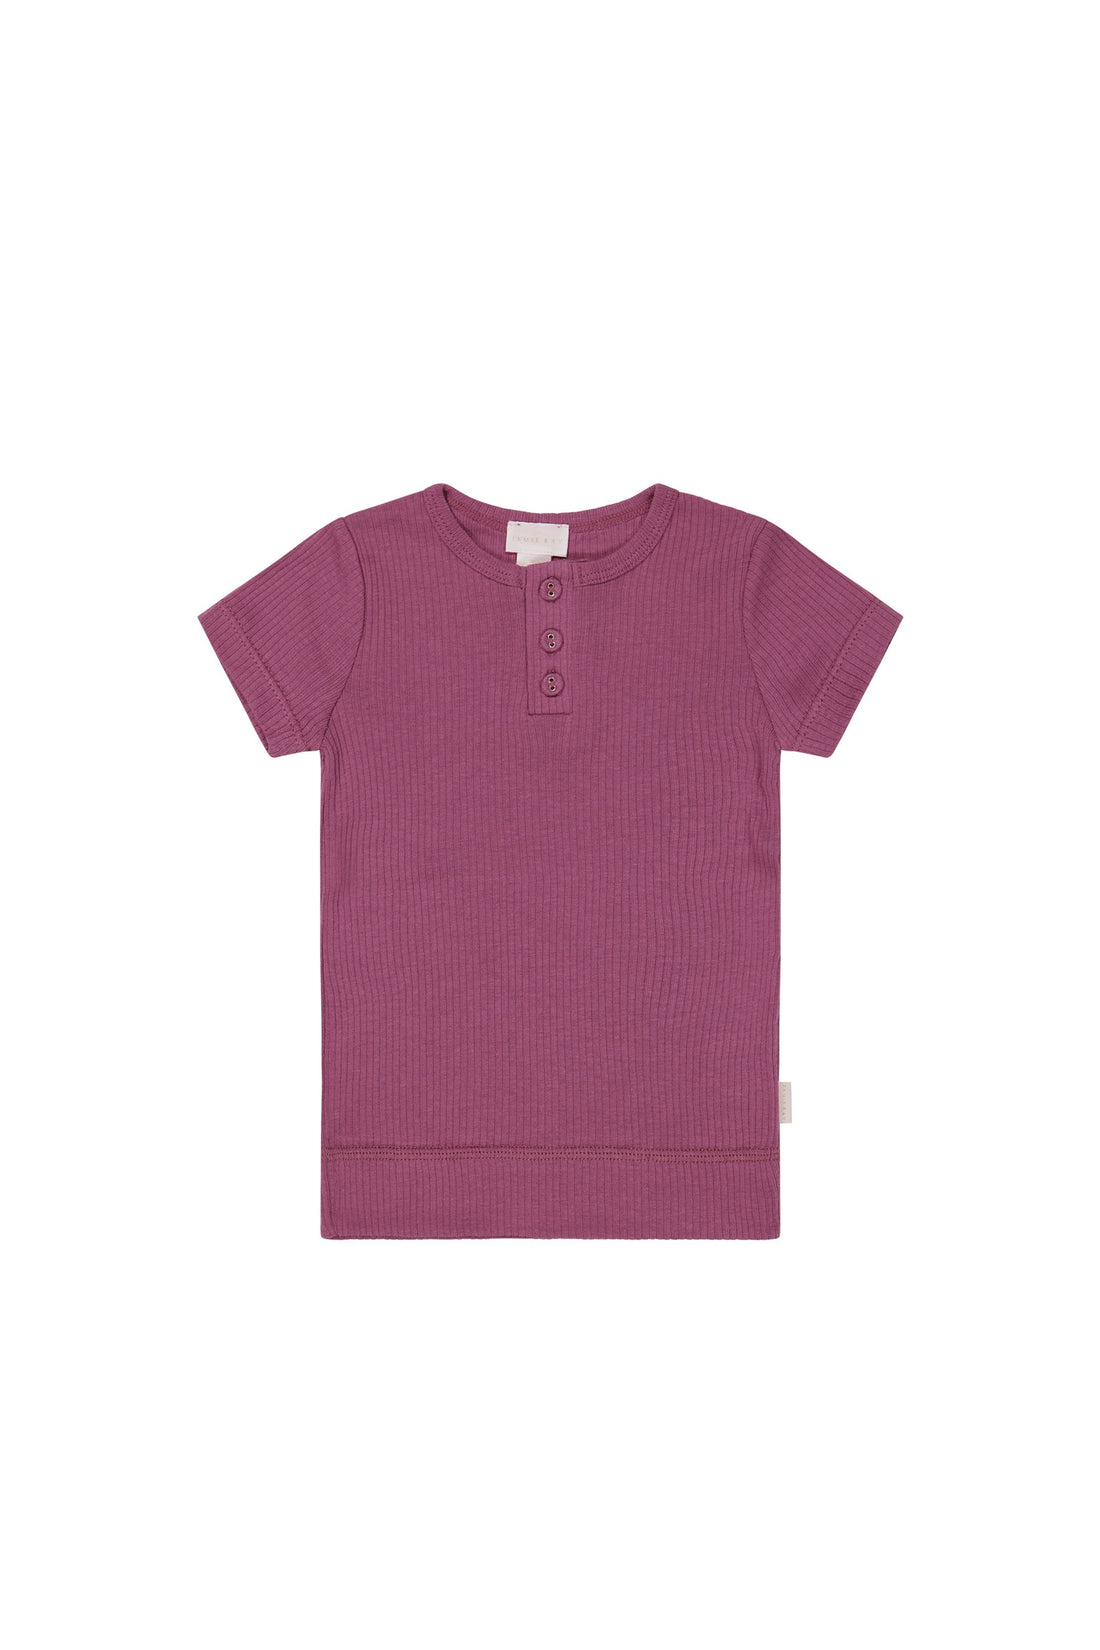 Organic Cotton Modal Henley Tee - Cranberry Childrens Top from Jamie Kay USA